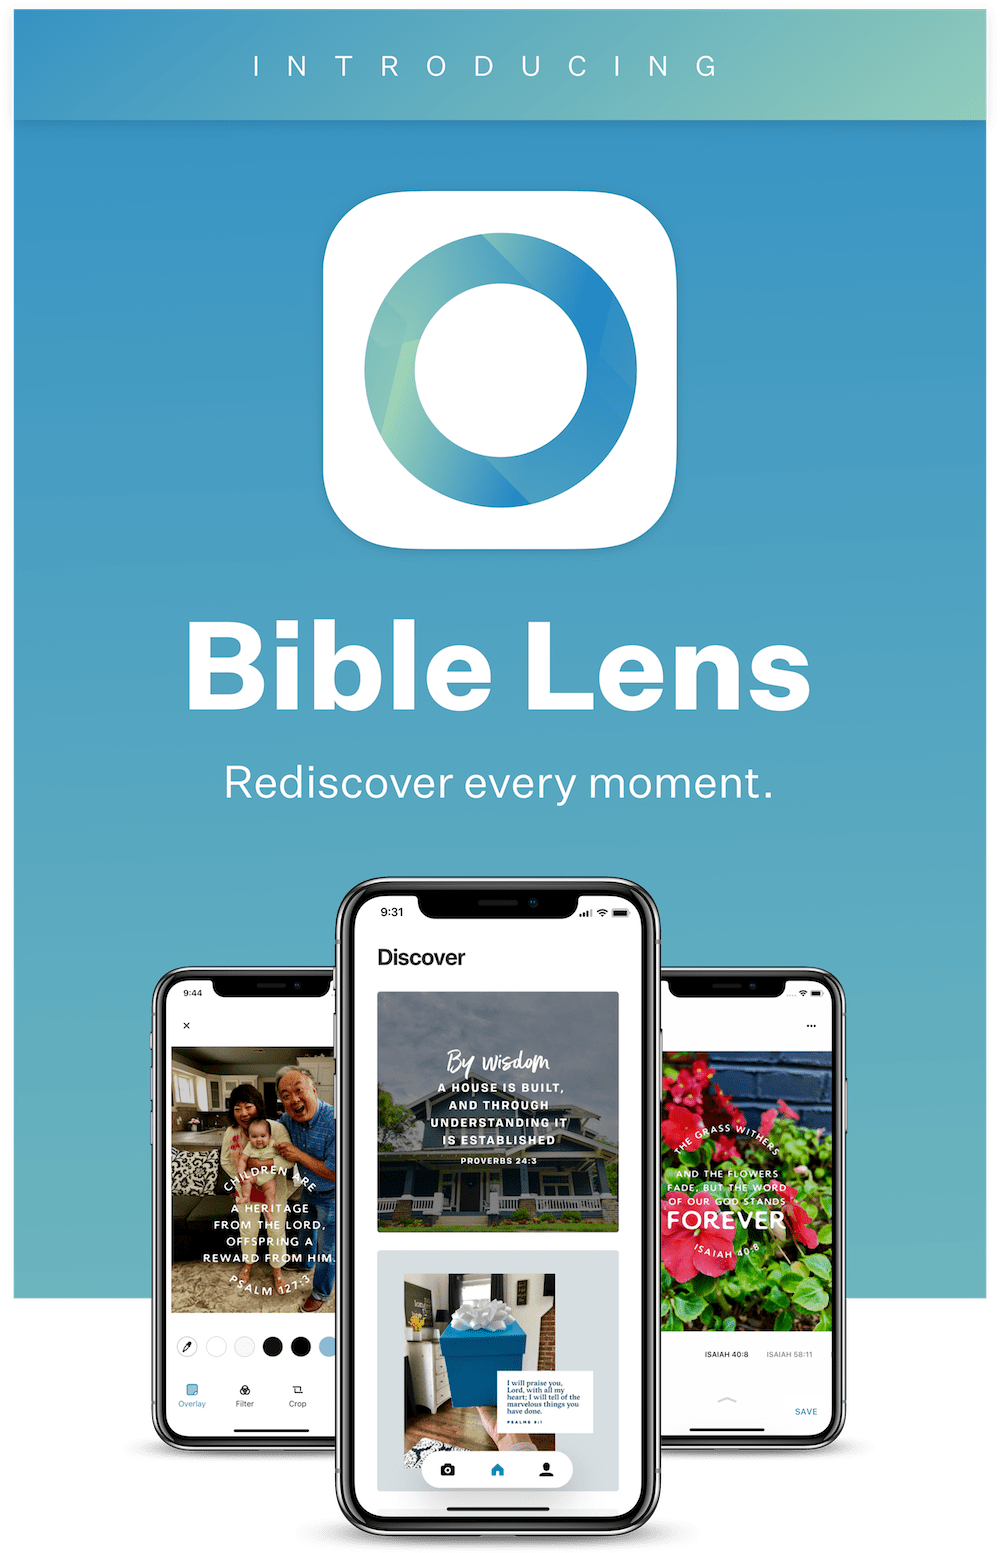 YouVersion Bible Lens - Now you can easily create Bible Verse memes with your personal photos. #BibleLens